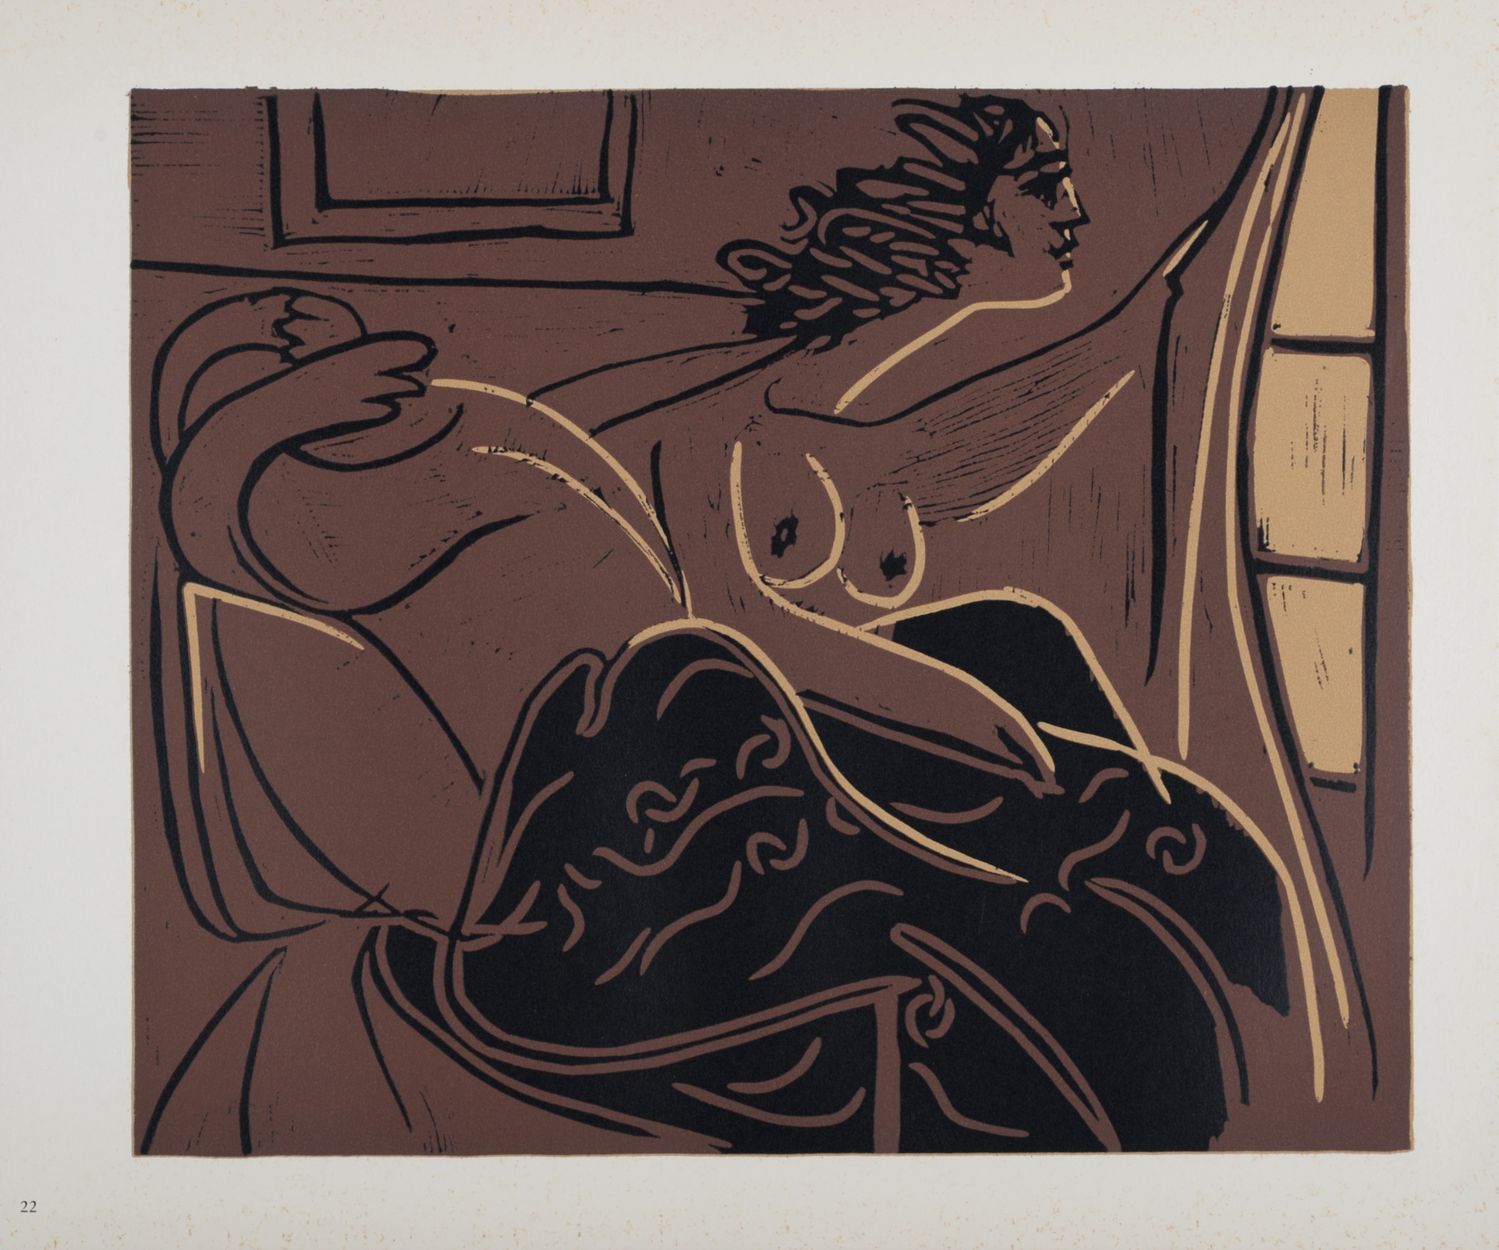 Pablo PICASSO Pablo Picasso (after)

Women looking out the window, 1962 Linocut &hellip;